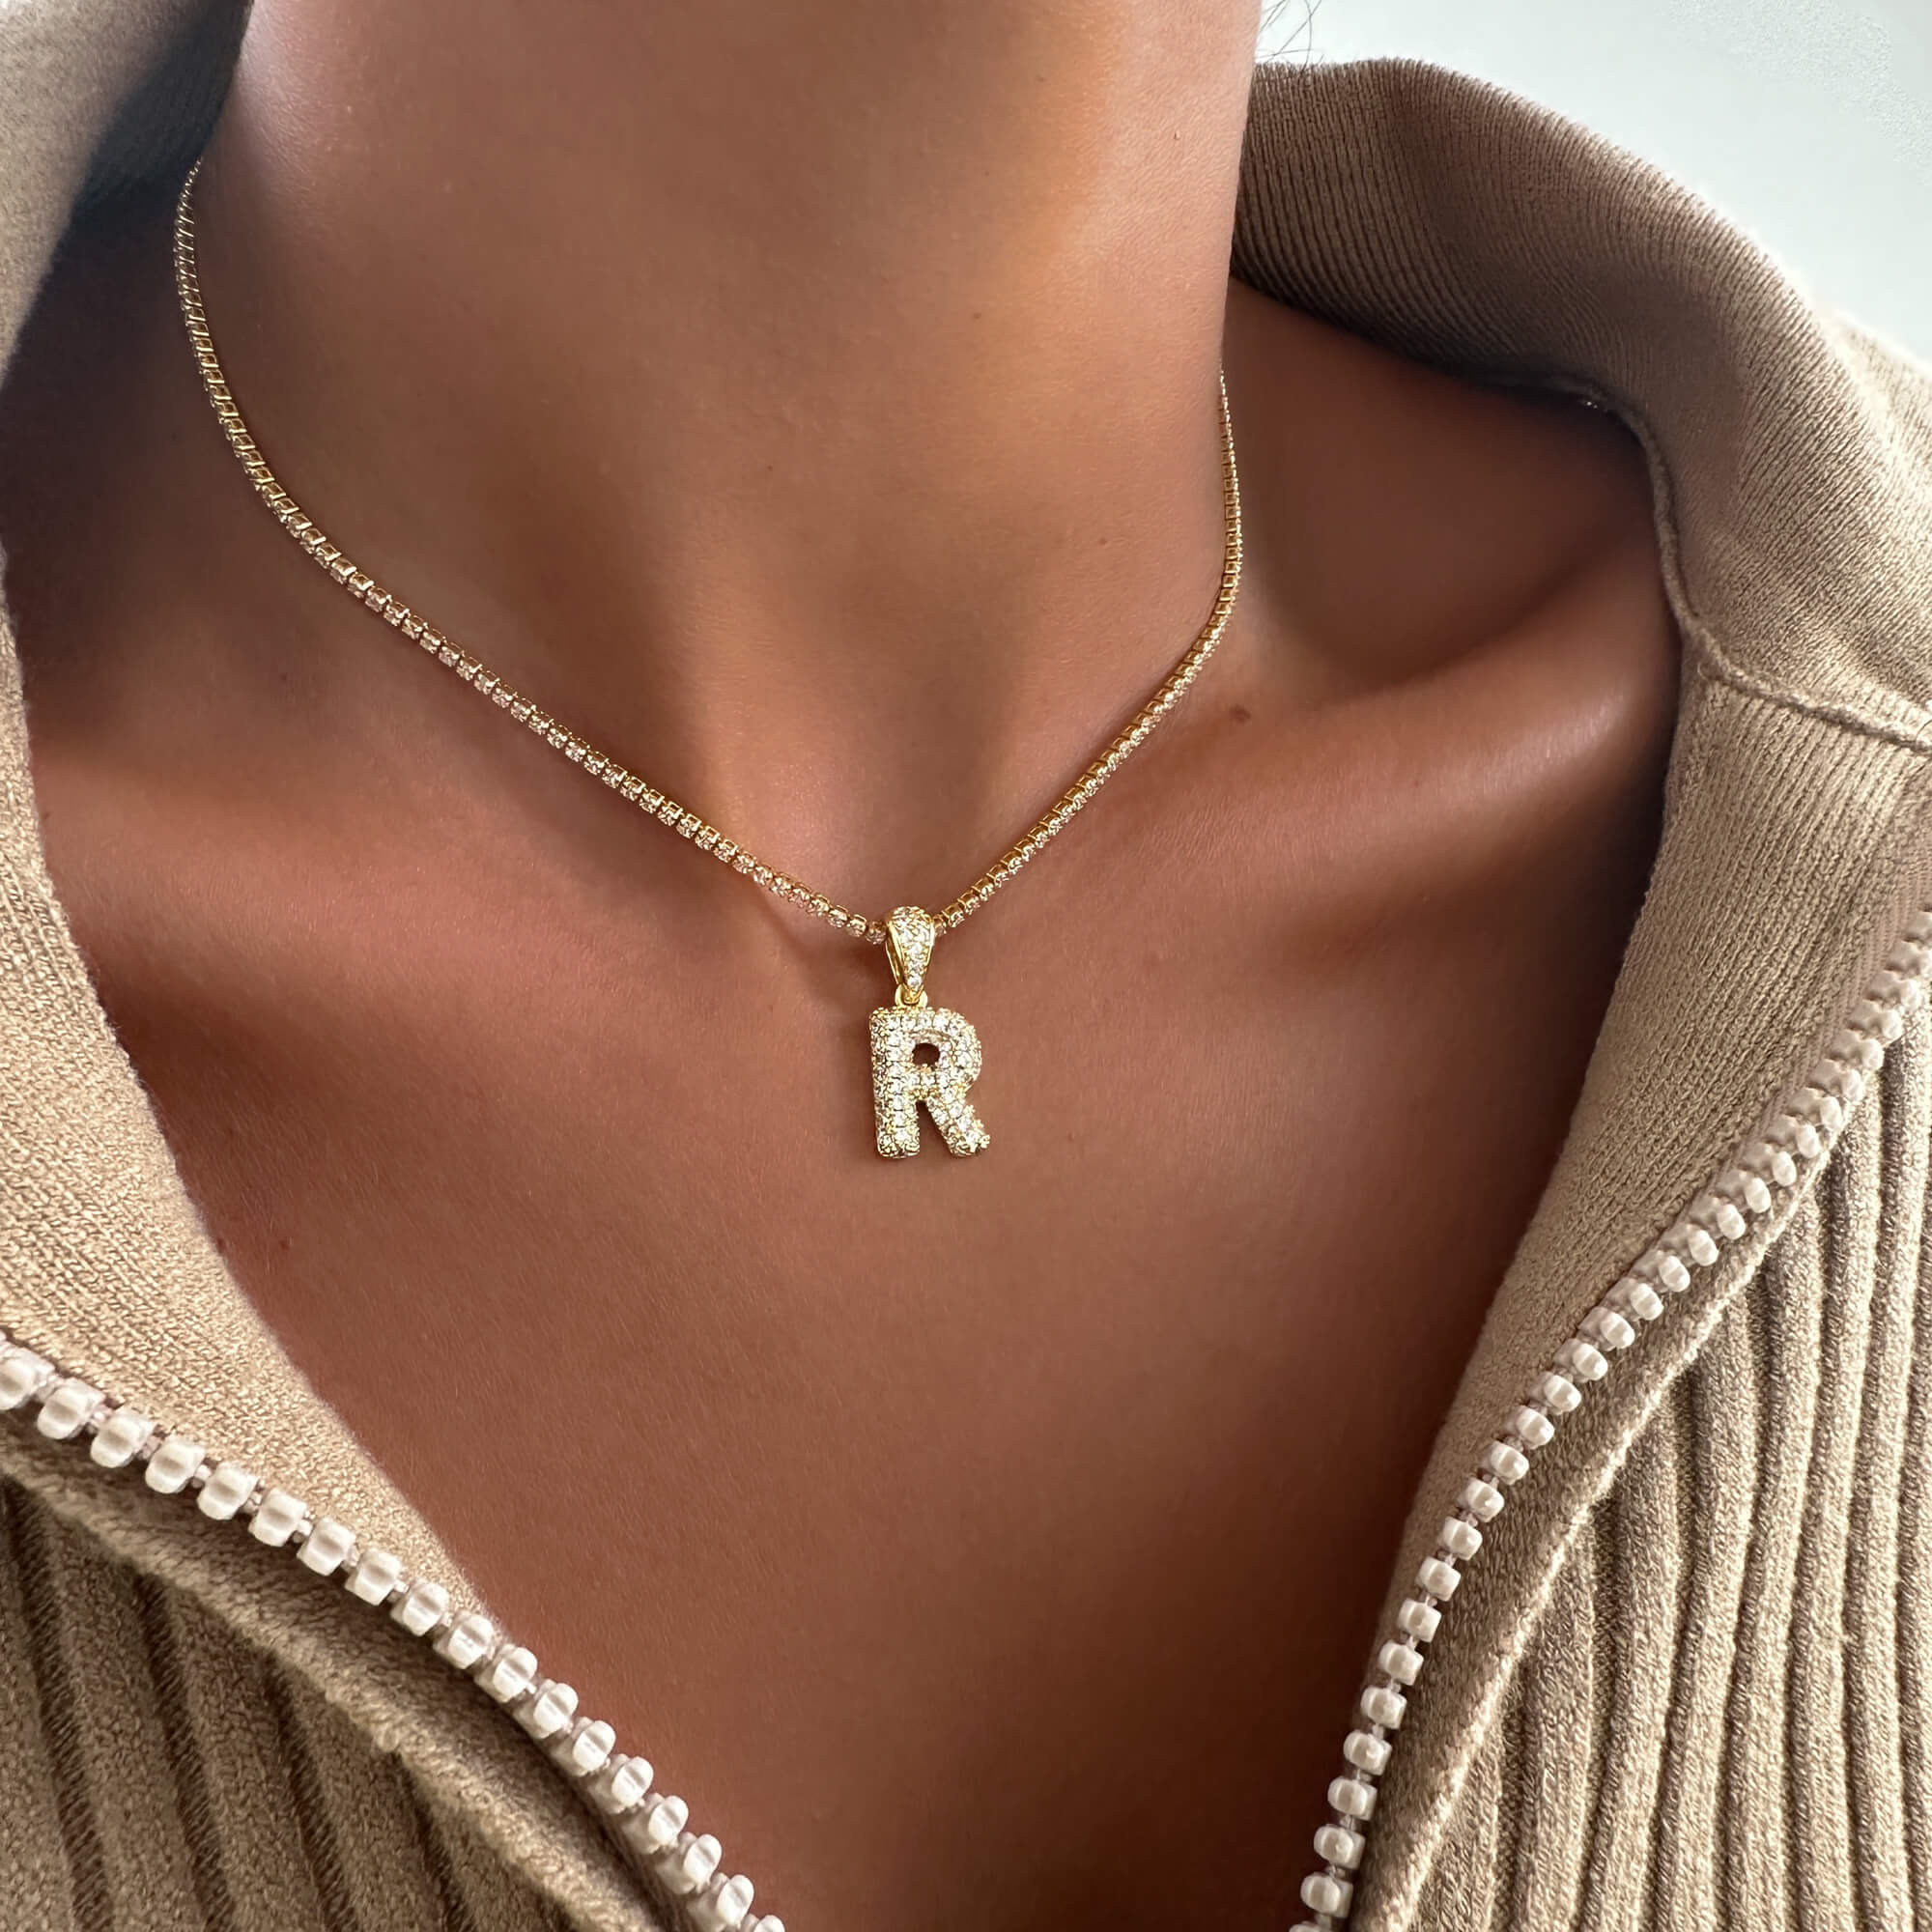 ICY Mini Bubble Initial Necklace